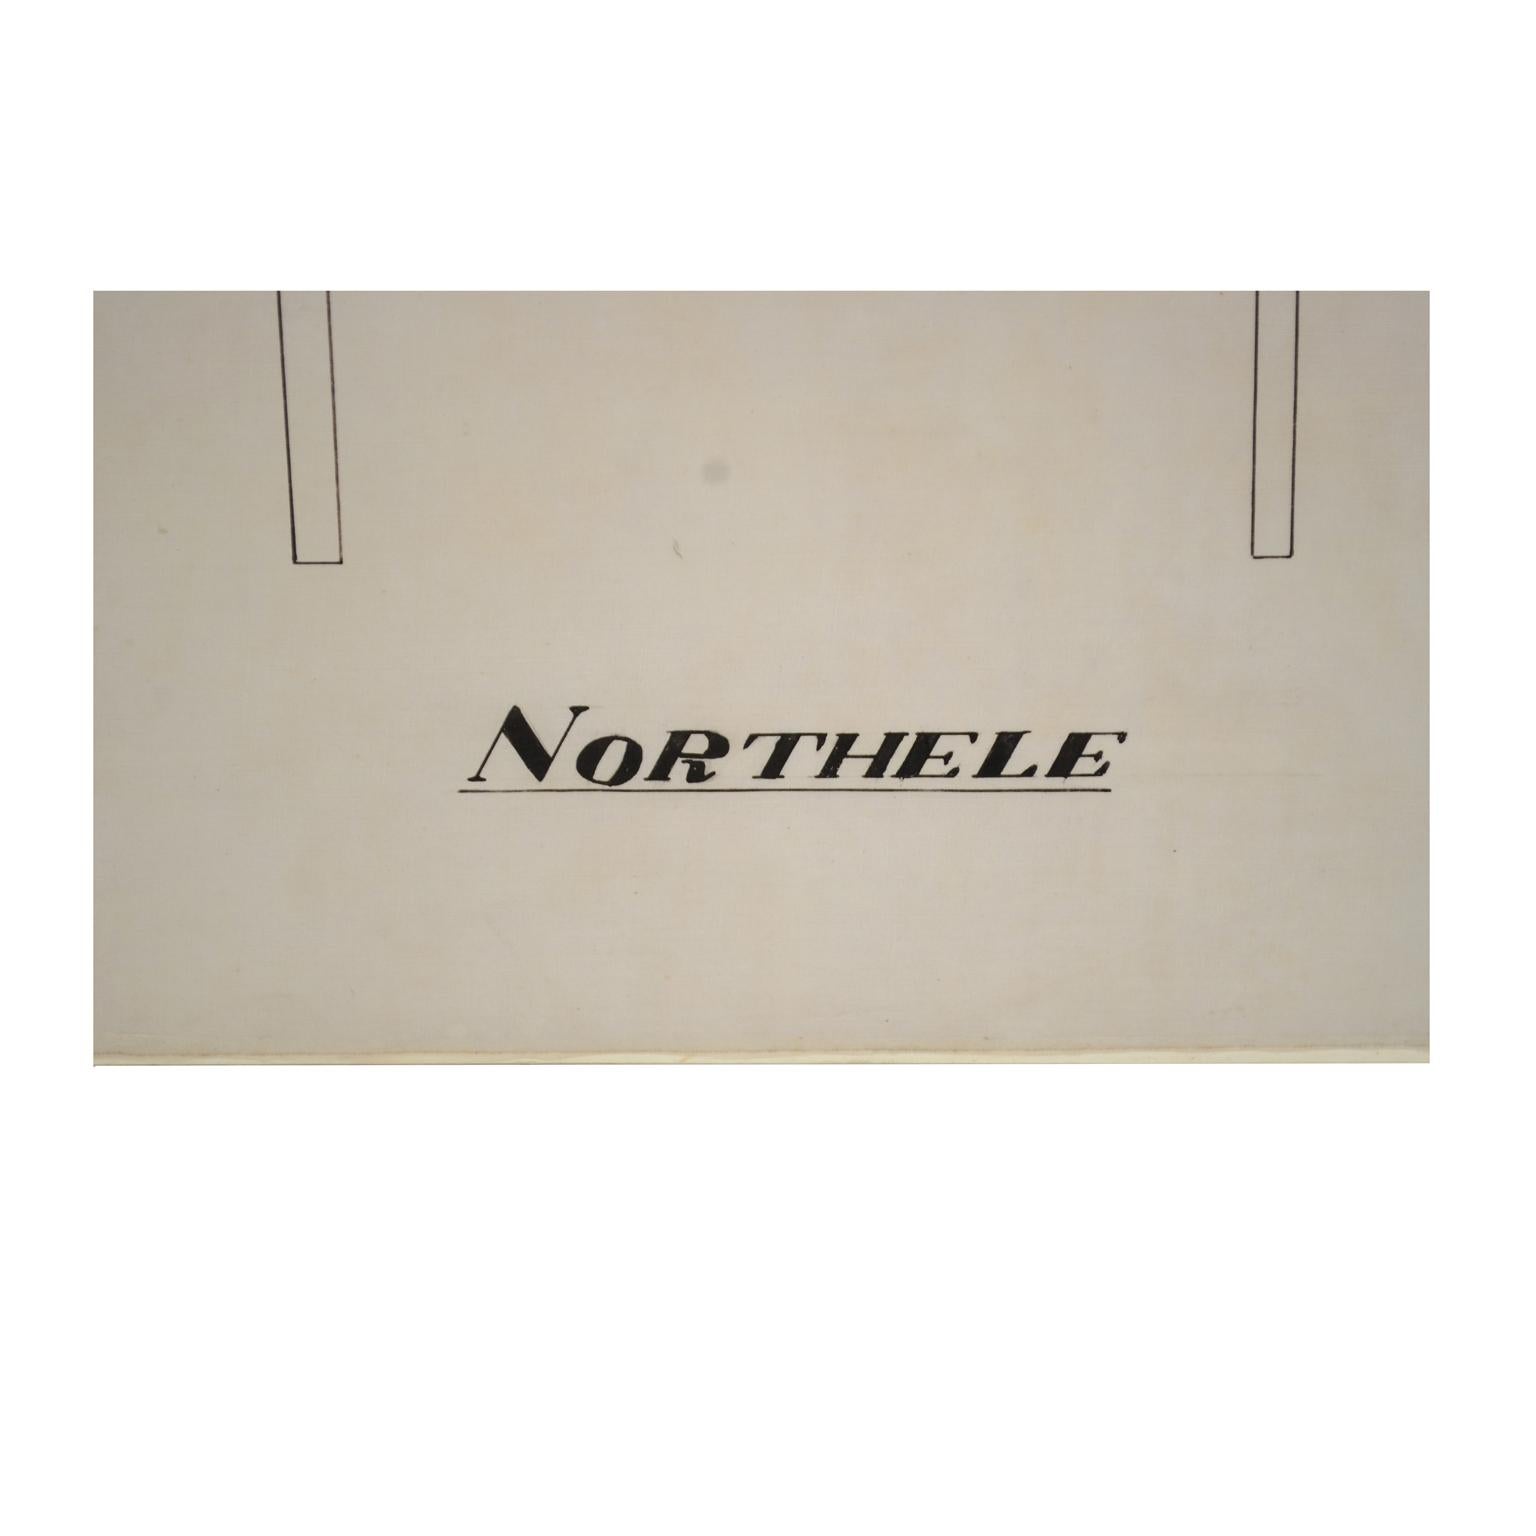 Project coming from the archives of Uffa Fox and never entered the commercial circuit depicting Northele, a sloop 14 m long, made by Berthon Boats in Lymington Dorset in 1949 according to shipyard project. Measures: Cm 78 x 82.4 (H) - inches 30.70 x